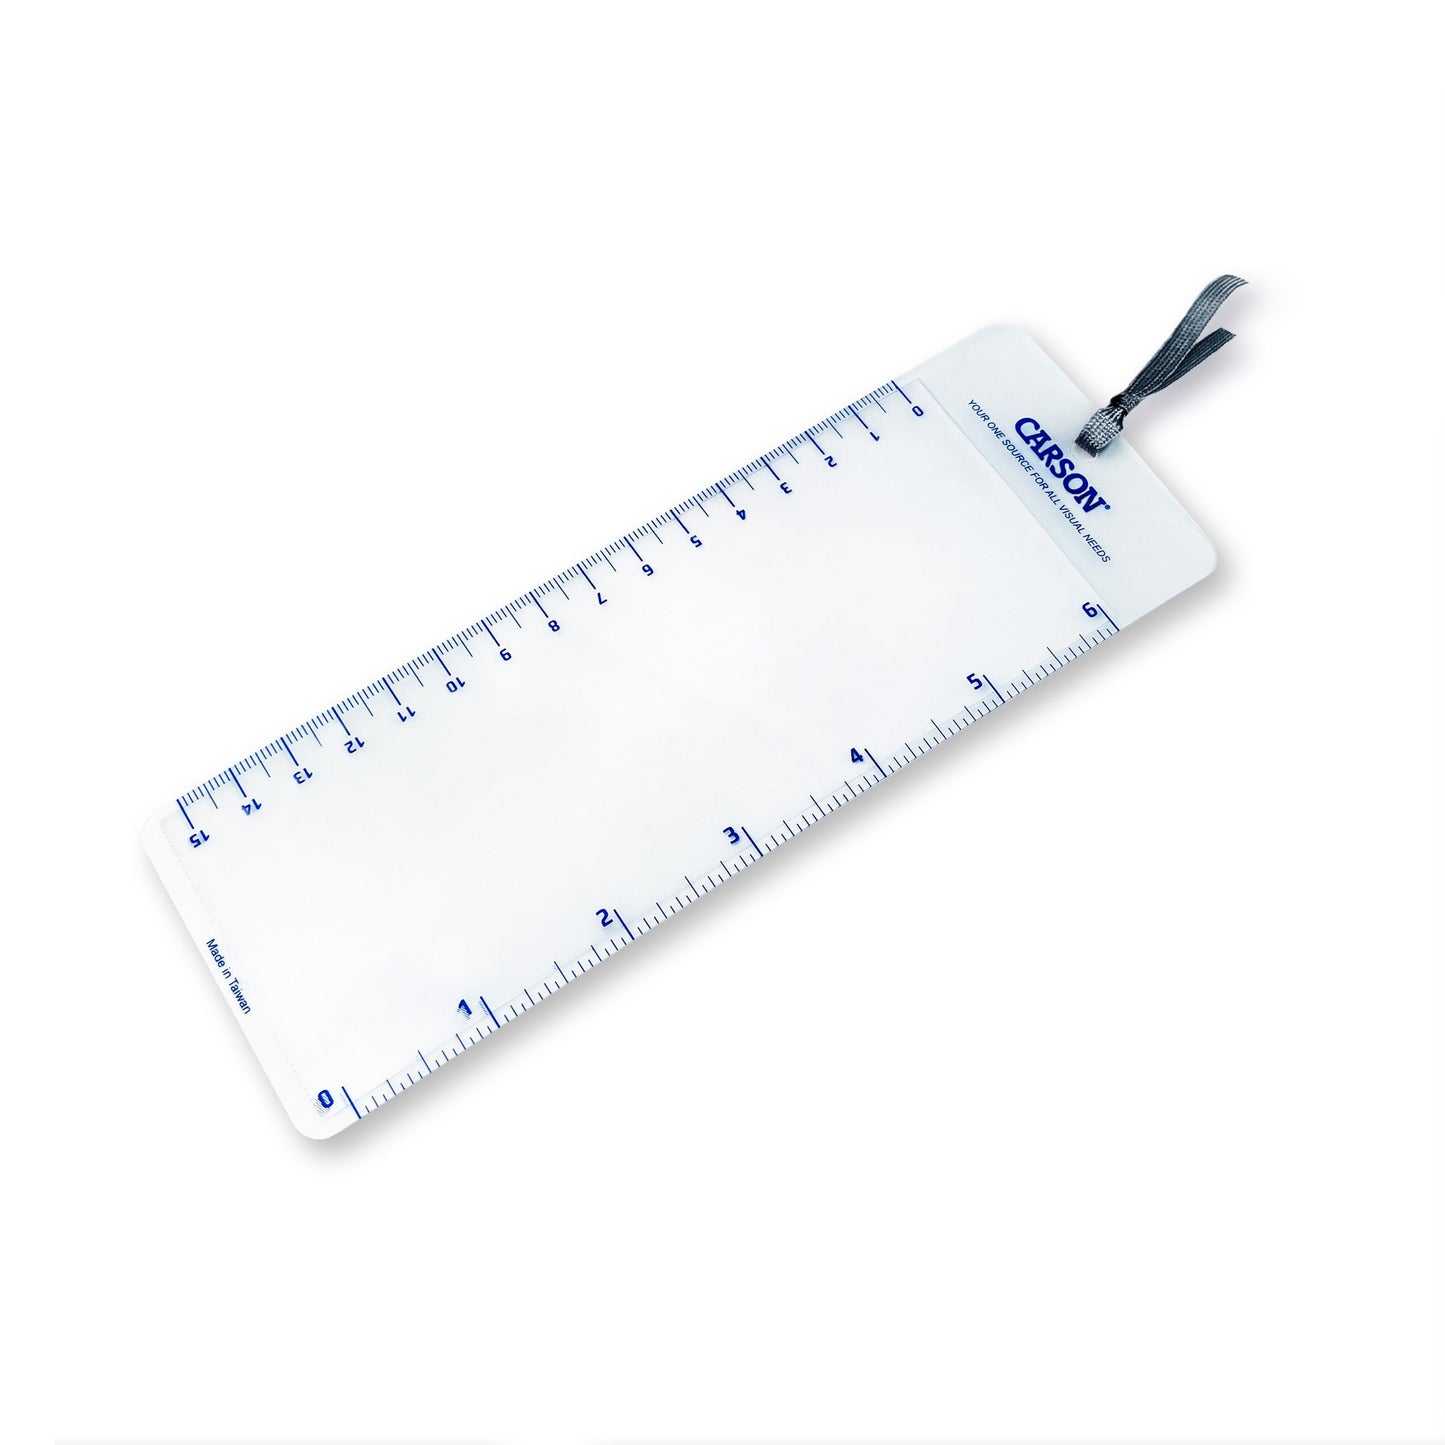 Carson MagniMark Fresnel 3x Power Page Magnifier with 6″ Ruler MM-22